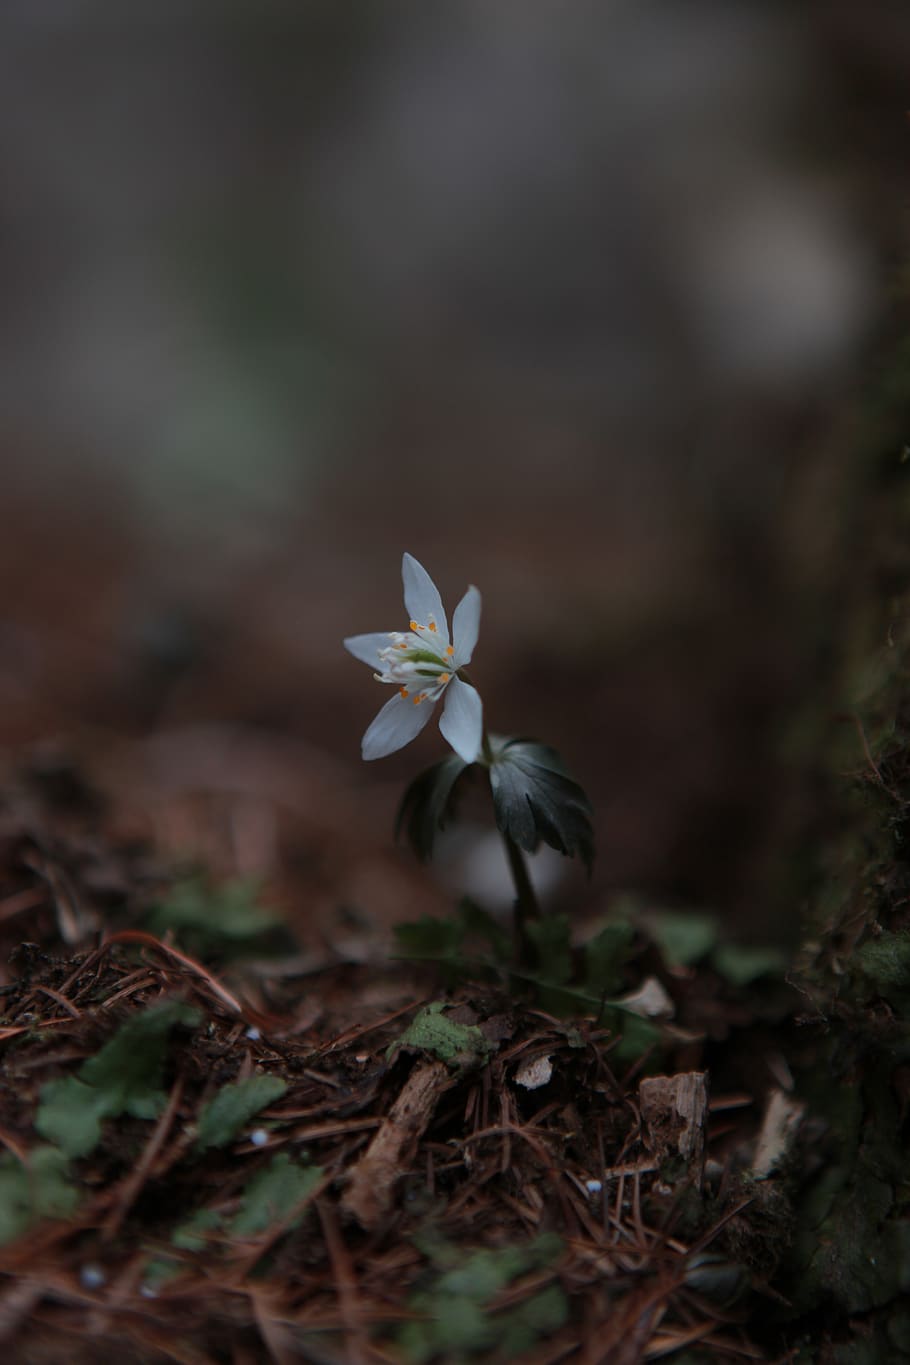 you also wind flower, wildflower, flowers, plants, spring, nature, petal, white, eranthis, flowering plant